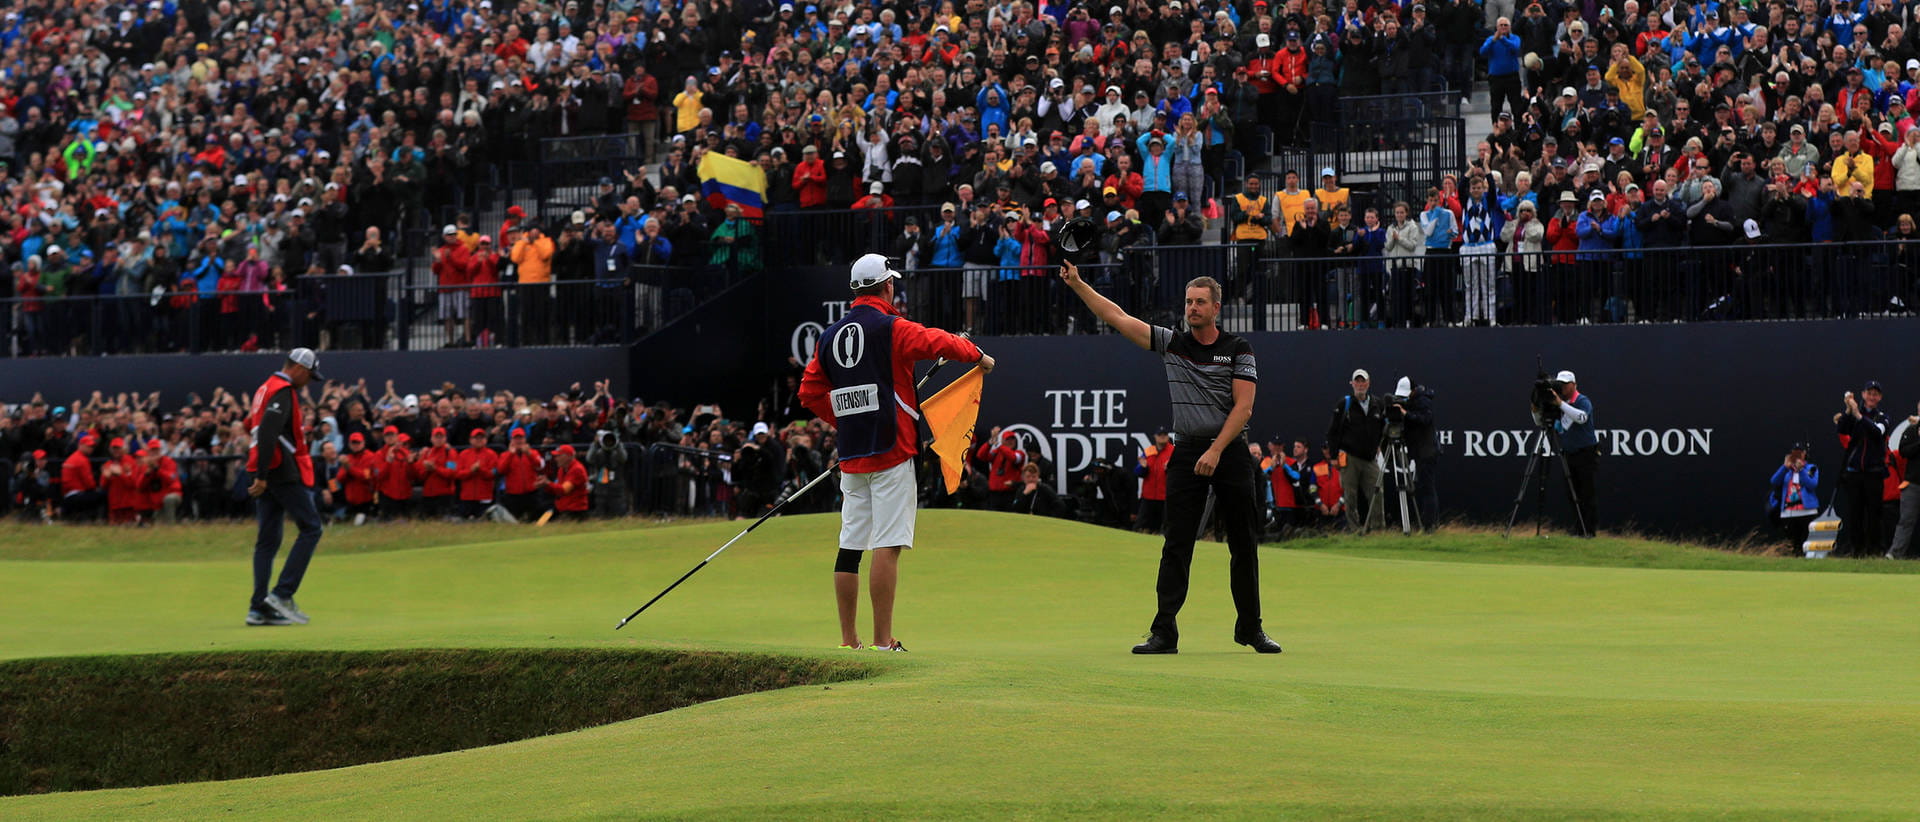 Premium Hospitality Experiences for The 152nd Open at Royal Troon The